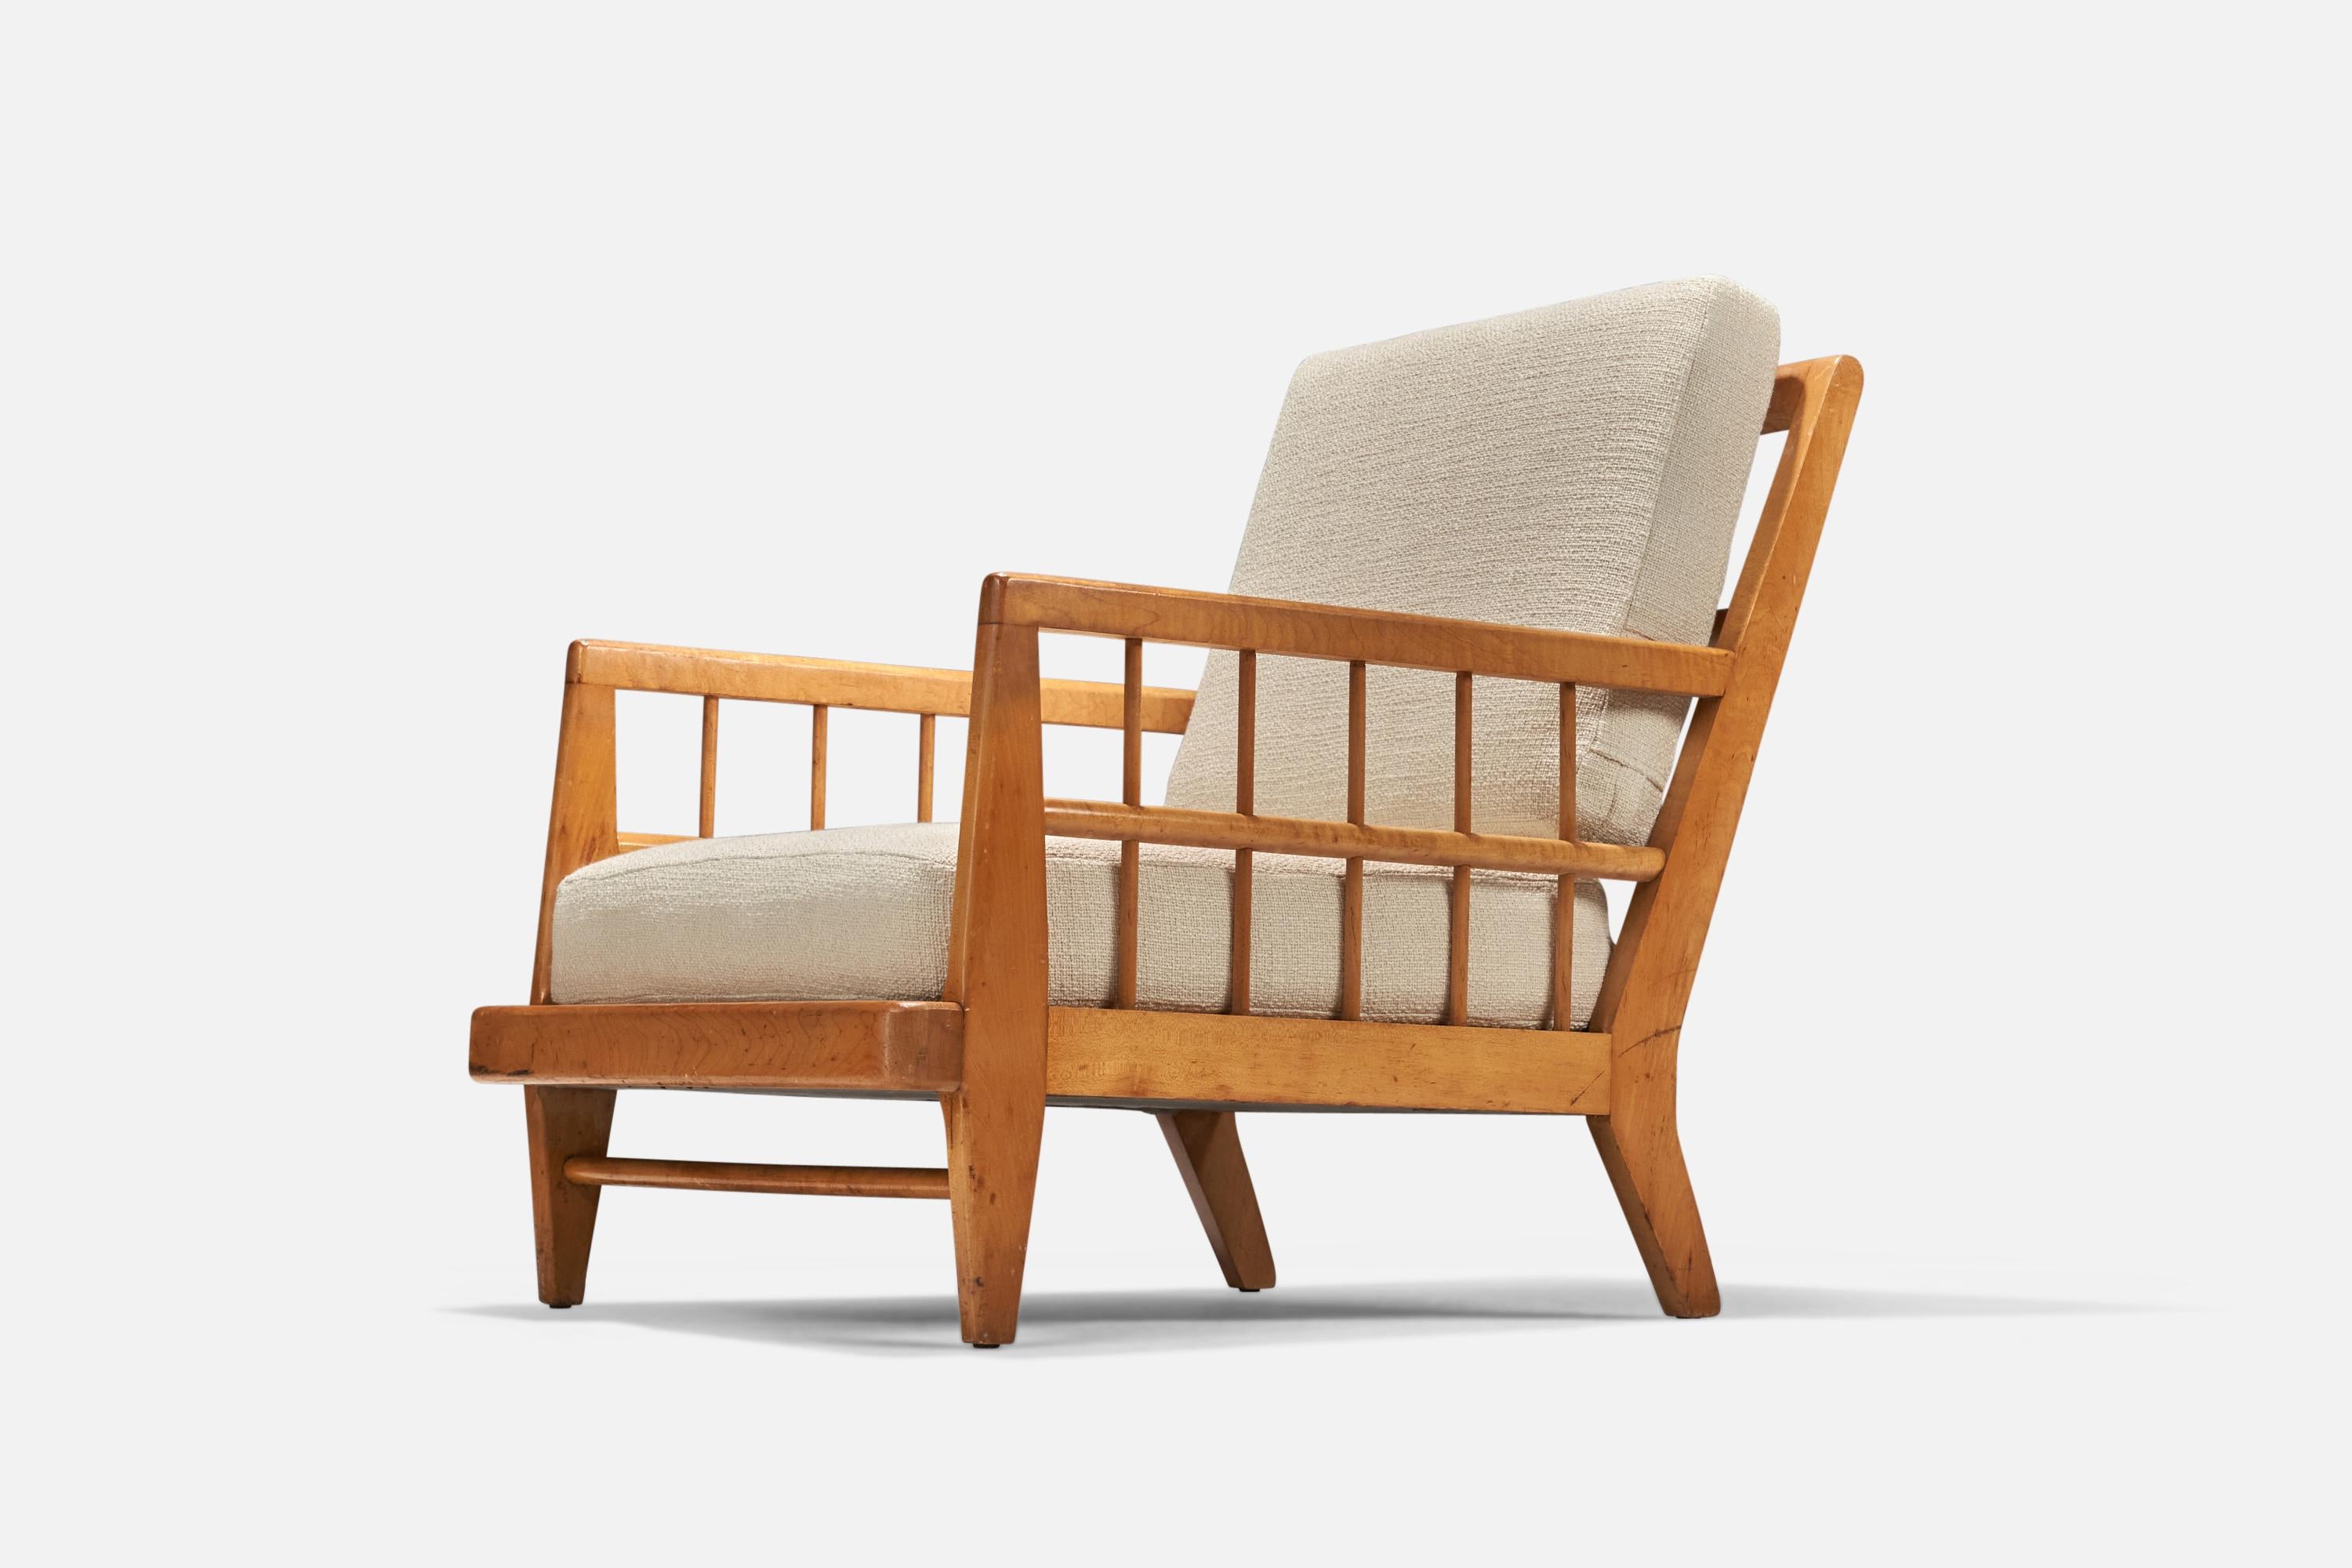 Mid-Century Modern Edward Wormley, Lounge Chairs, Beech, Fabric, Drexel, United States, 1940s For Sale